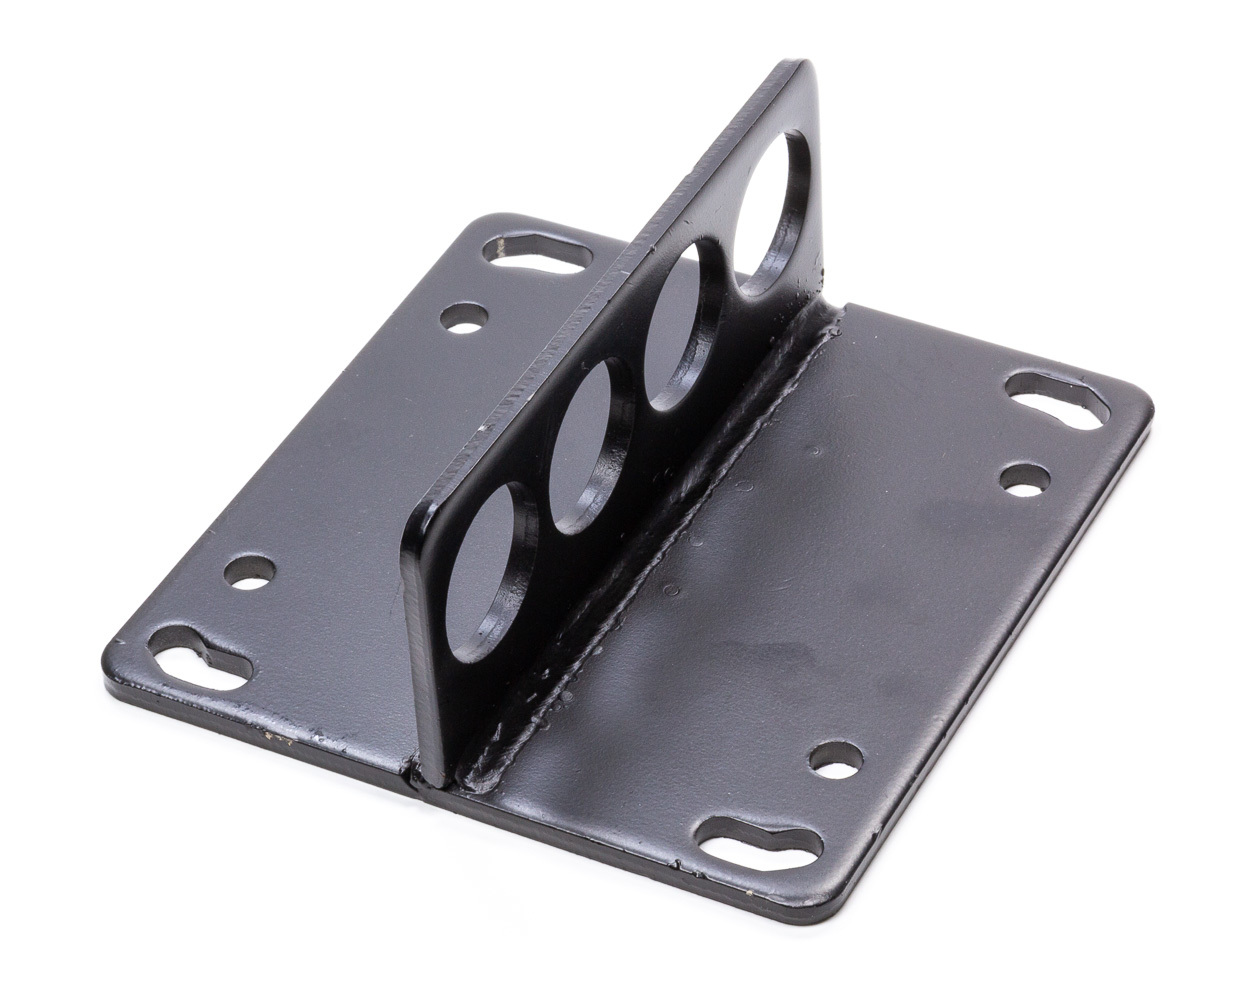 Proform 67457 Engine Lift Plate, 3/16 in Thick, Steel, Natural, Square Bore / Holley / Dominator Flange, Each